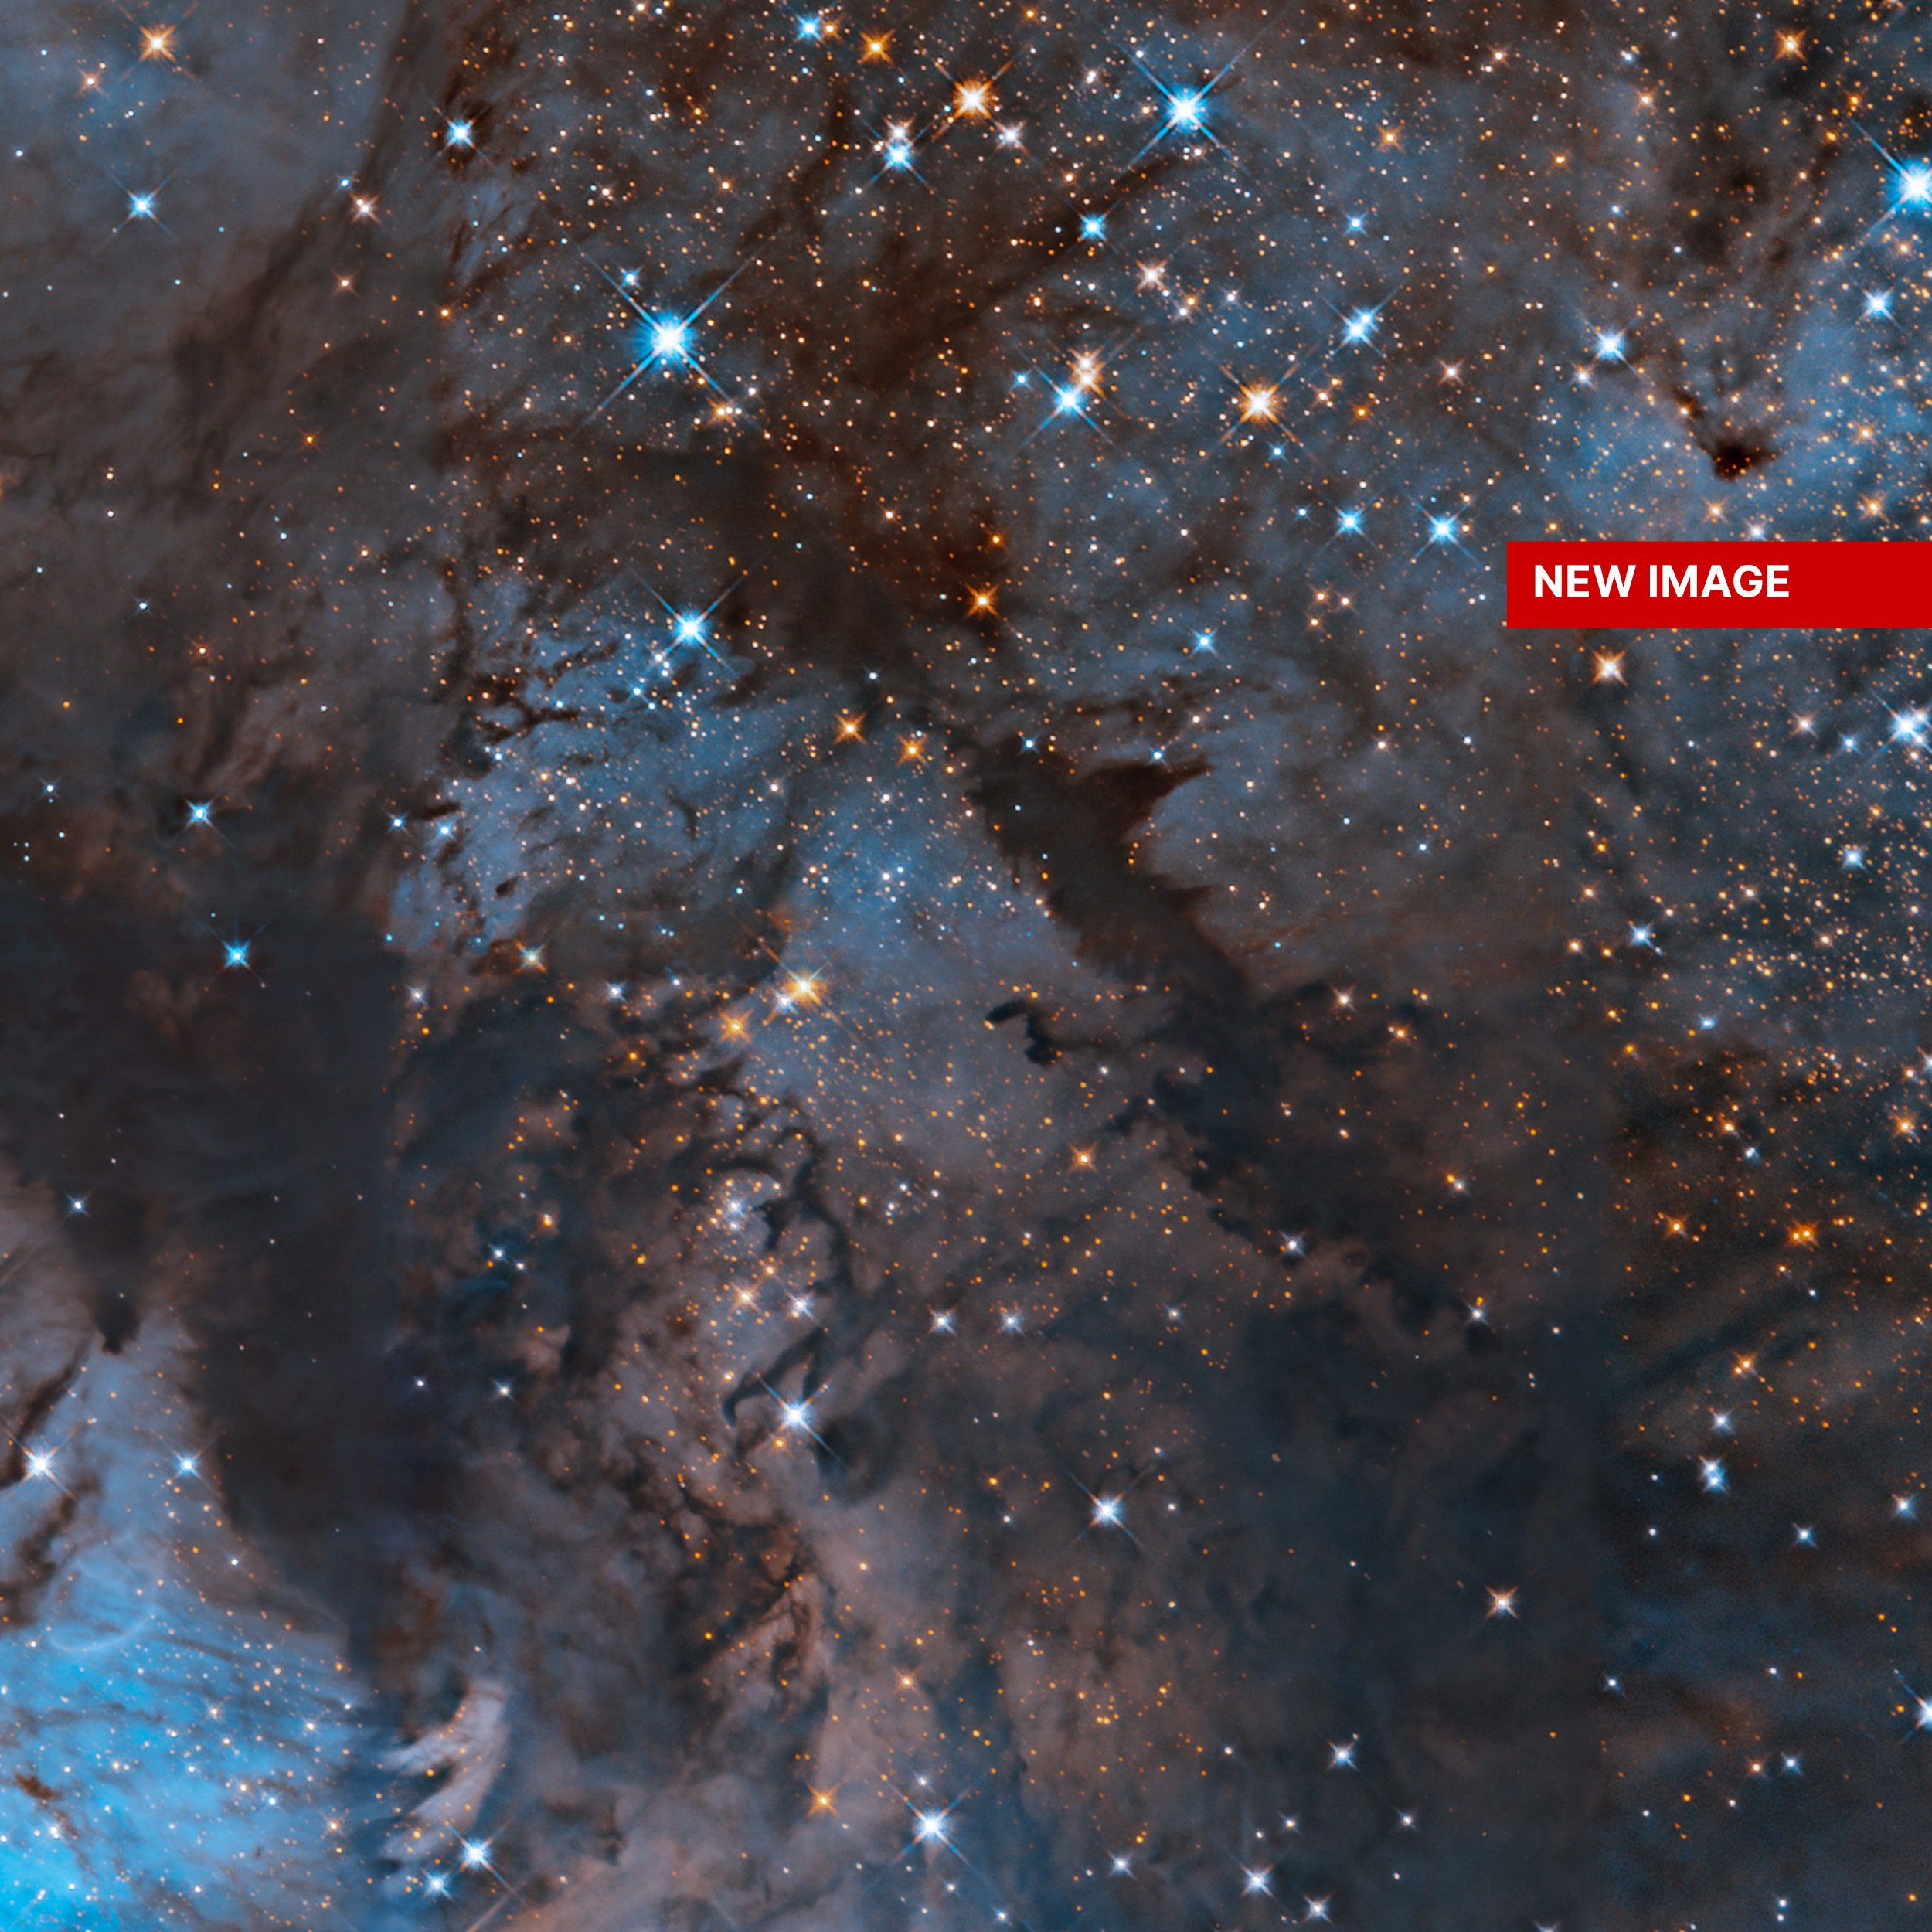 Blue and orange stars glitter across the image, interwoven with dark clouds of brown dust and bright, glowing regions of blue. A red rectangle near the upper-right corner holds white lettering that says, "New Image."